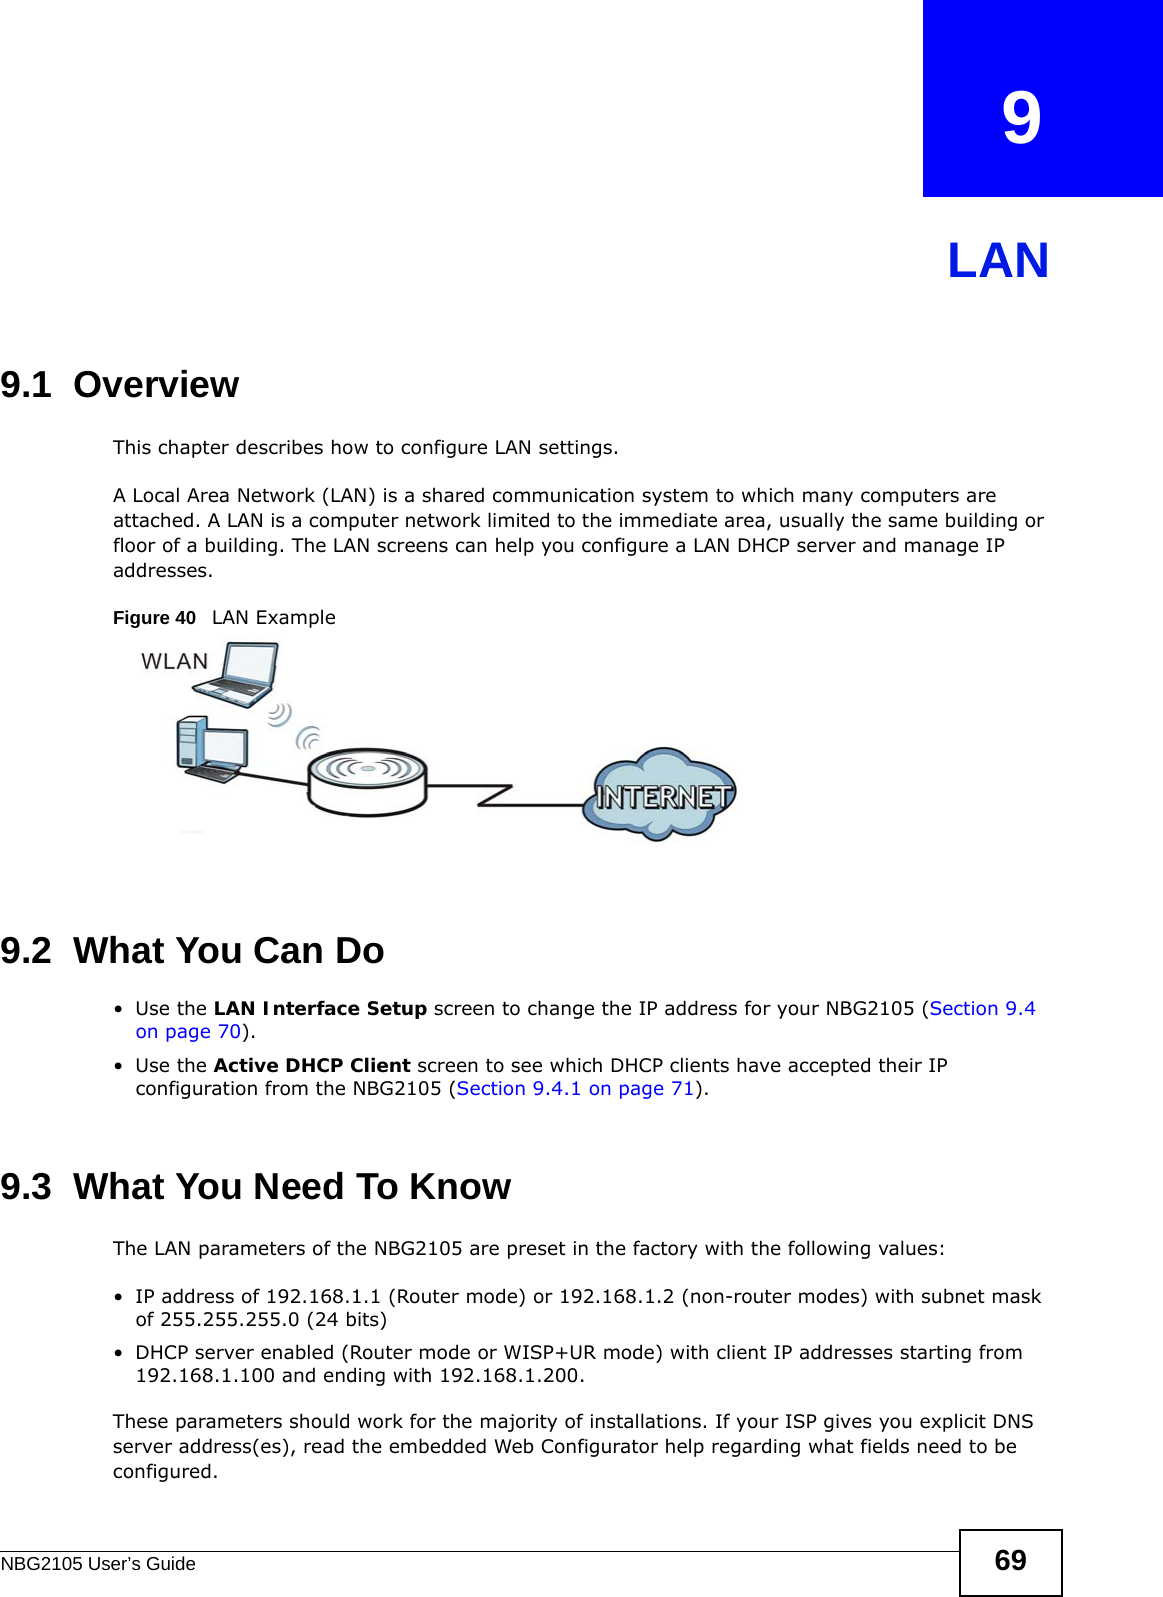 NBG2105 User’s Guide 69CHAPTER   9LAN9.1  OverviewThis chapter describes how to configure LAN settings.A Local Area Network (LAN) is a shared communication system to which many computers are attached. A LAN is a computer network limited to the immediate area, usually the same building or floor of a building. The LAN screens can help you configure a LAN DHCP server and manage IP addresses.Figure 40   LAN Example9.2  What You Can Do•Use the LAN Interface Setup screen to change the IP address for your NBG2105 (Section 9.4 on page 70).•Use the Active DHCP Client screen to see which DHCP clients have accepted their IP configuration from the NBG2105 (Section 9.4.1 on page 71).9.3  What You Need To KnowThe LAN parameters of the NBG2105 are preset in the factory with the following values:• IP address of 192.168.1.1 (Router mode) or 192.168.1.2 (non-router modes) with subnet mask of 255.255.255.0 (24 bits)• DHCP server enabled (Router mode or WISP+UR mode) with client IP addresses starting from 192.168.1.100 and ending with 192.168.1.200. These parameters should work for the majority of installations. If your ISP gives you explicit DNS server address(es), read the embedded Web Configurator help regarding what fields need to be configured.